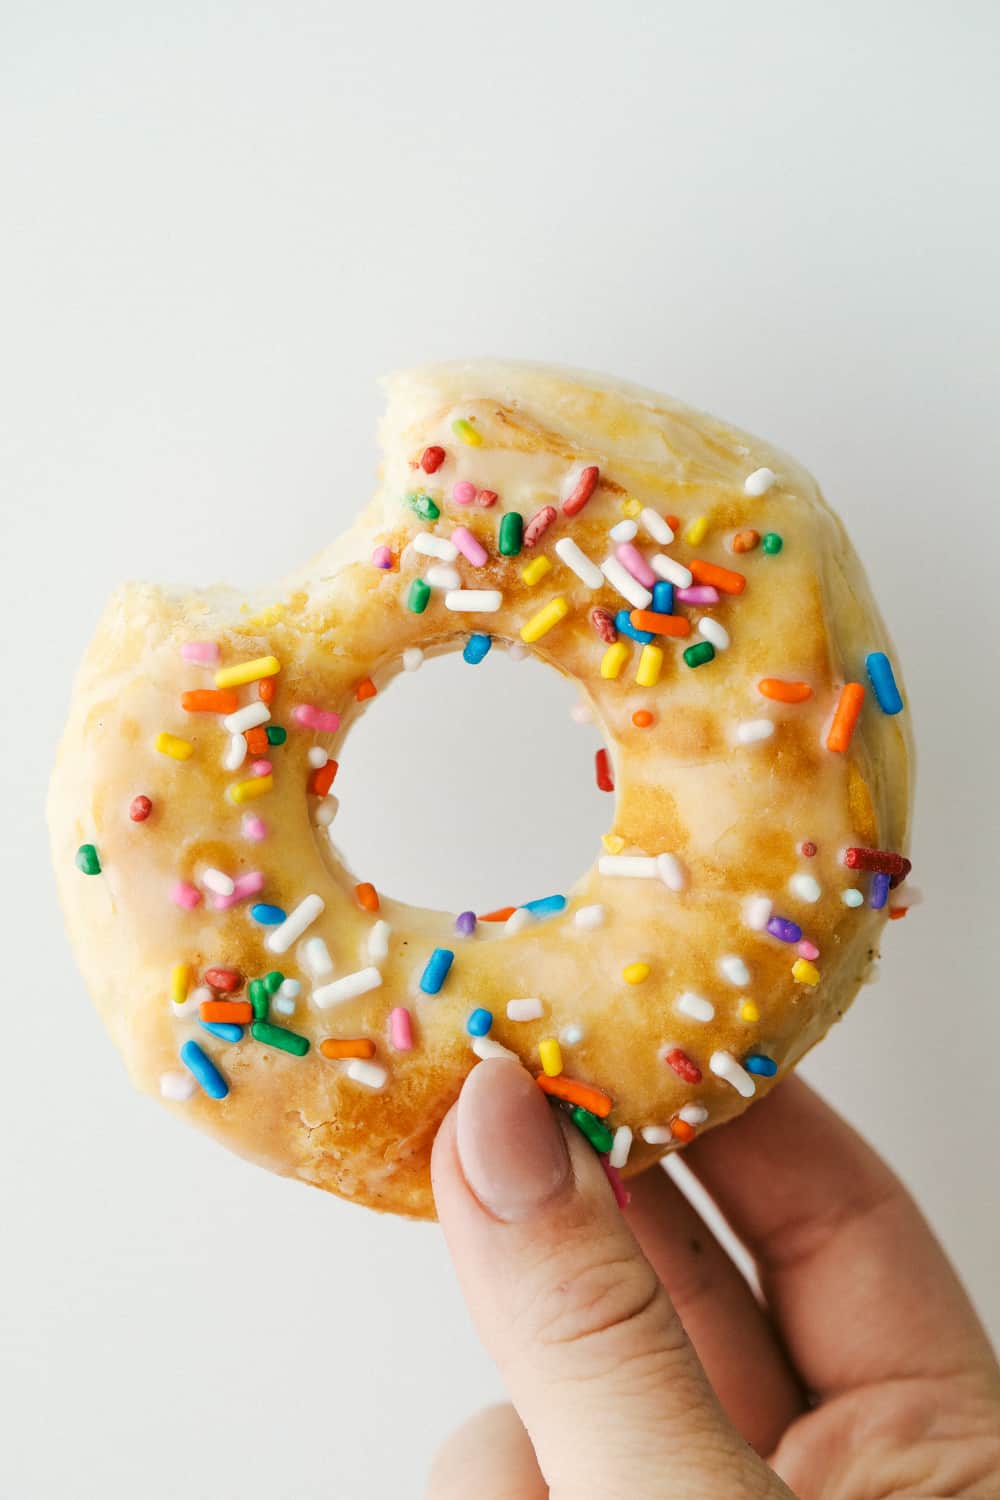 Holding a donut with sprinkles and bite out of it.